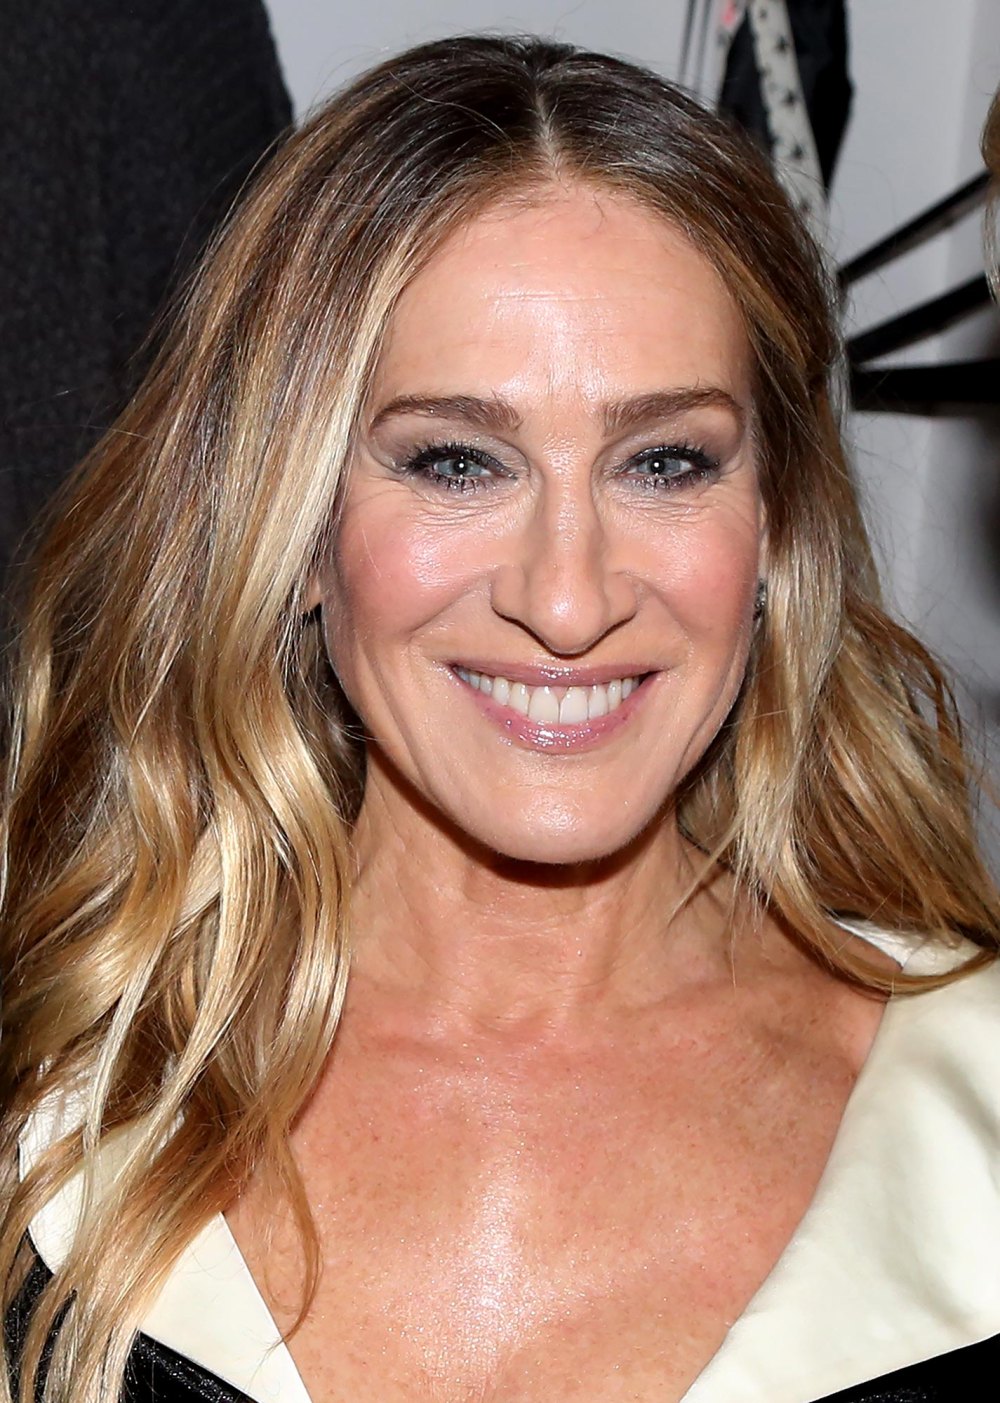 Sarah Jessica Parker Reveals Refreshingly Pared Down Approach to Travel Skincare Routine